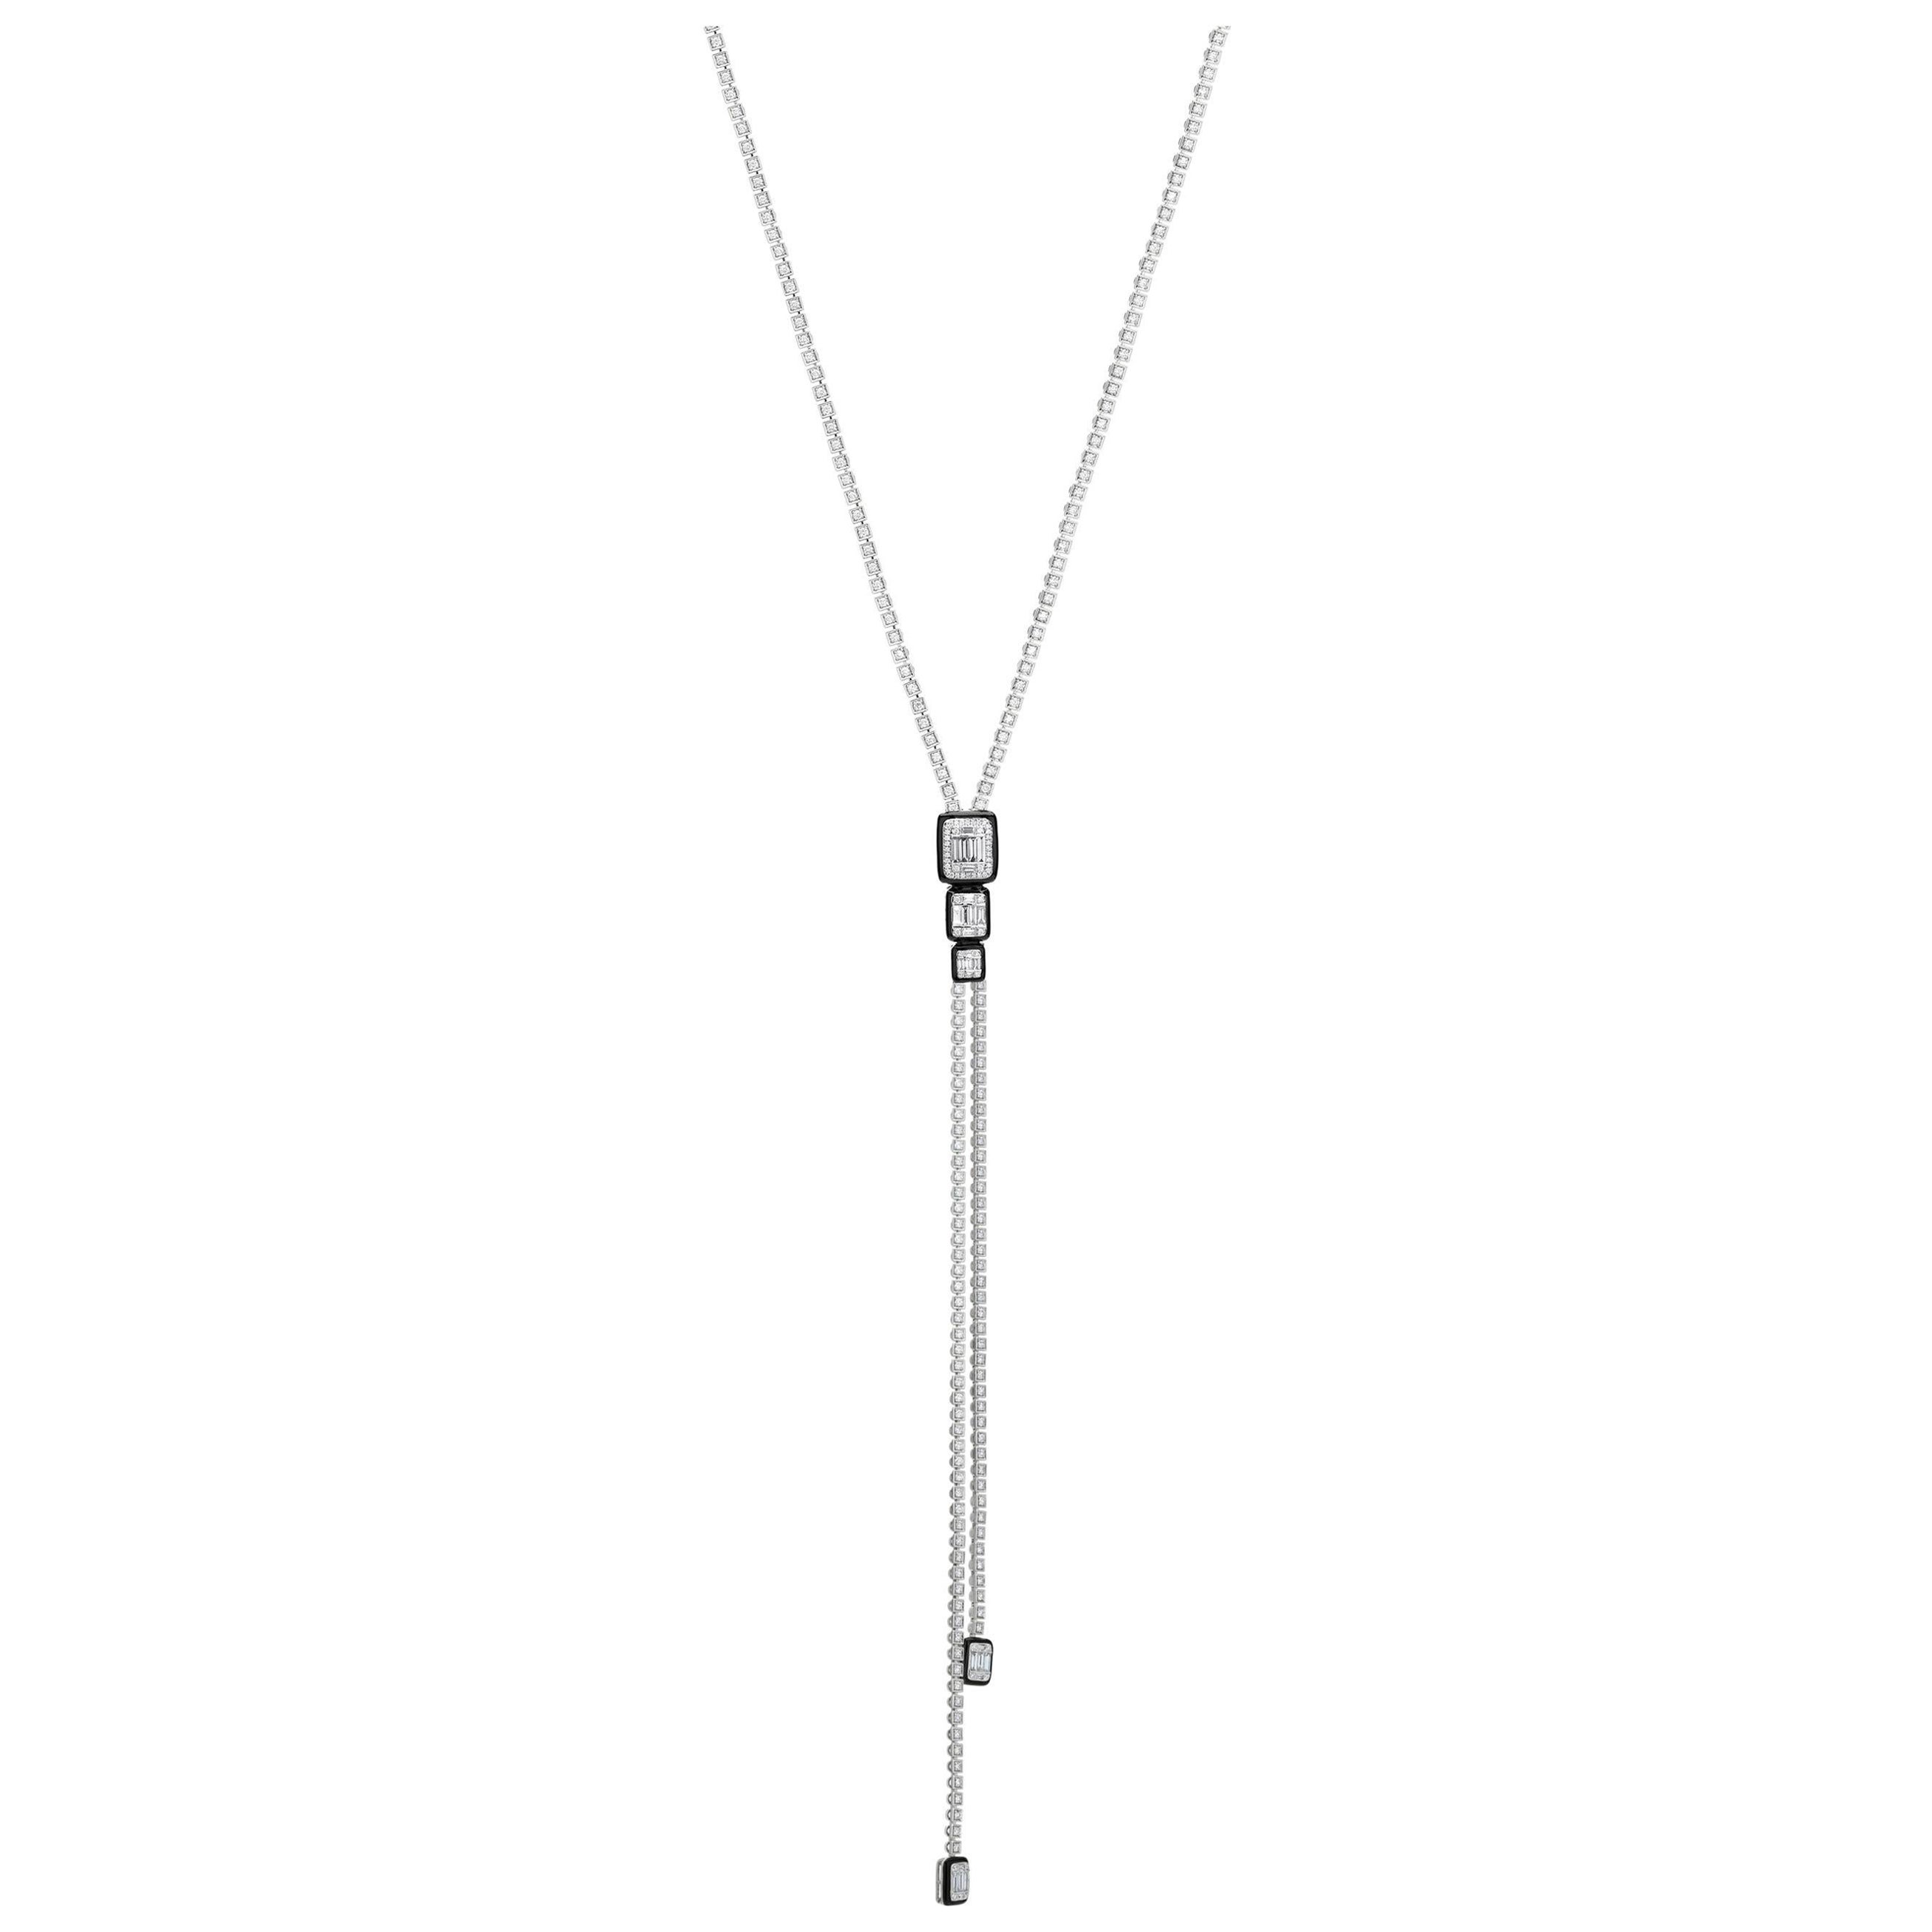 Nigaam 7.31cttw, Diamond with 0.35cts, Enamel Long Chain Necklace in 18k Gold For Sale